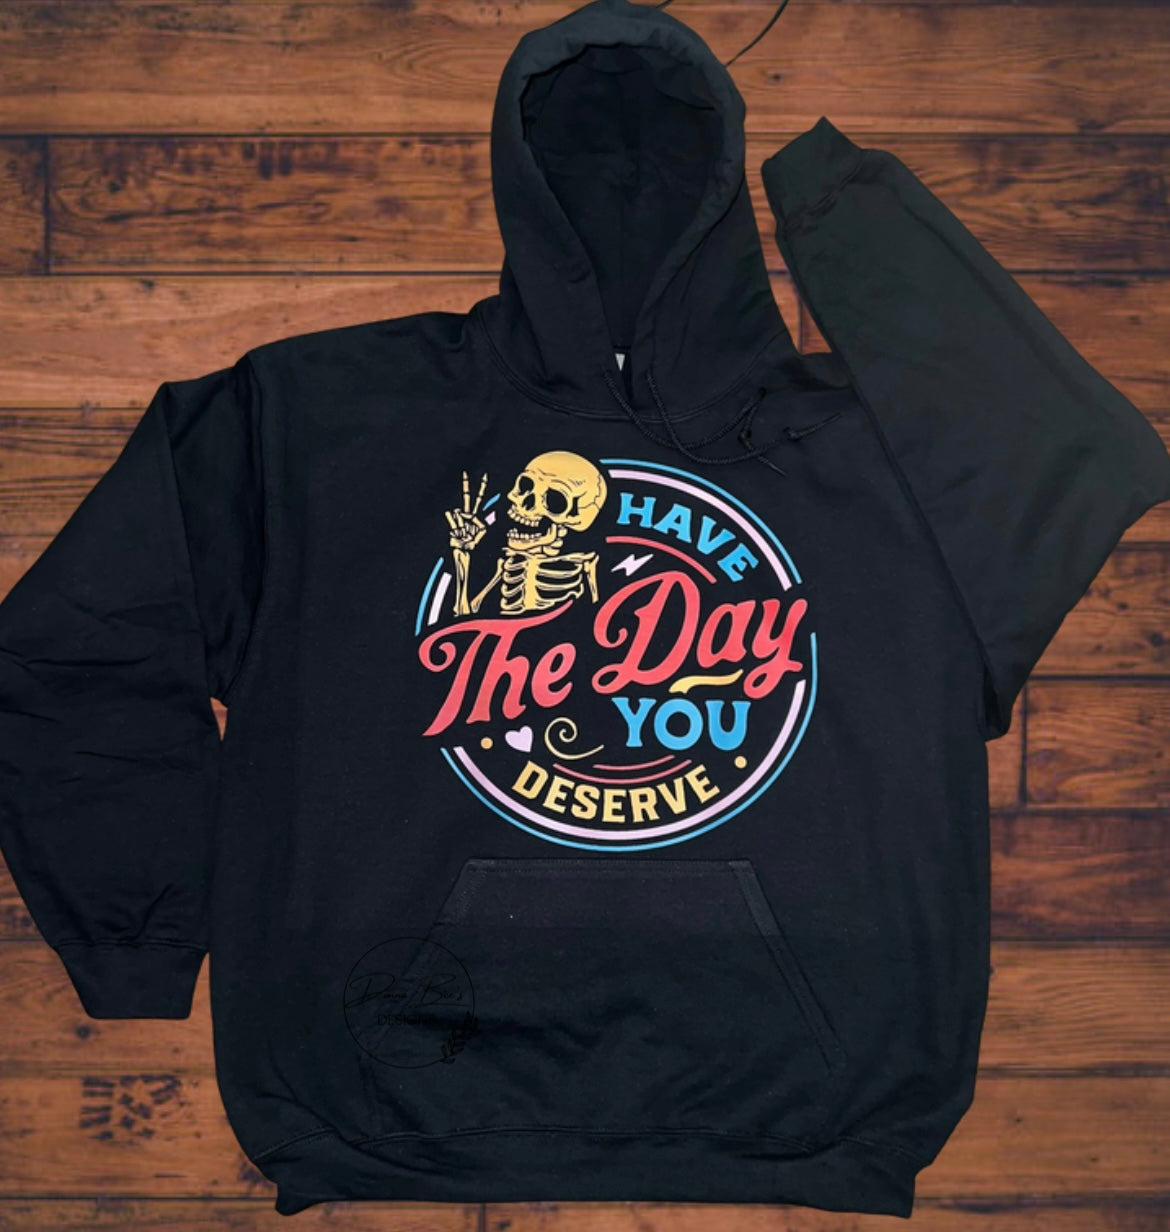 Have the Day you deserve Hoodie or crew neck sweatshirt